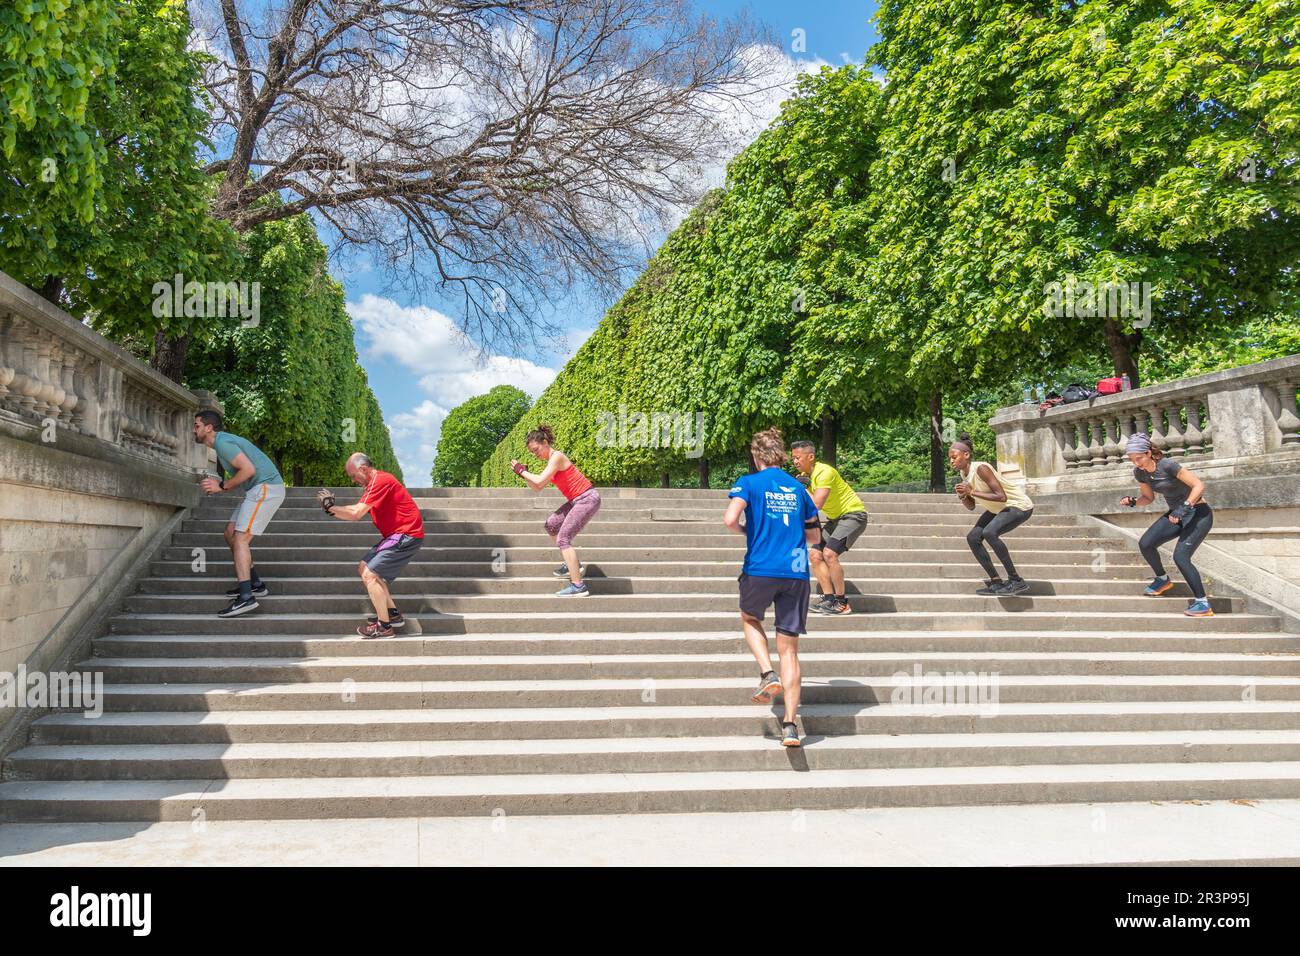 Tuileries Gardens, Paris, France. Sports class near the entrance to the gardens. Stock Photo